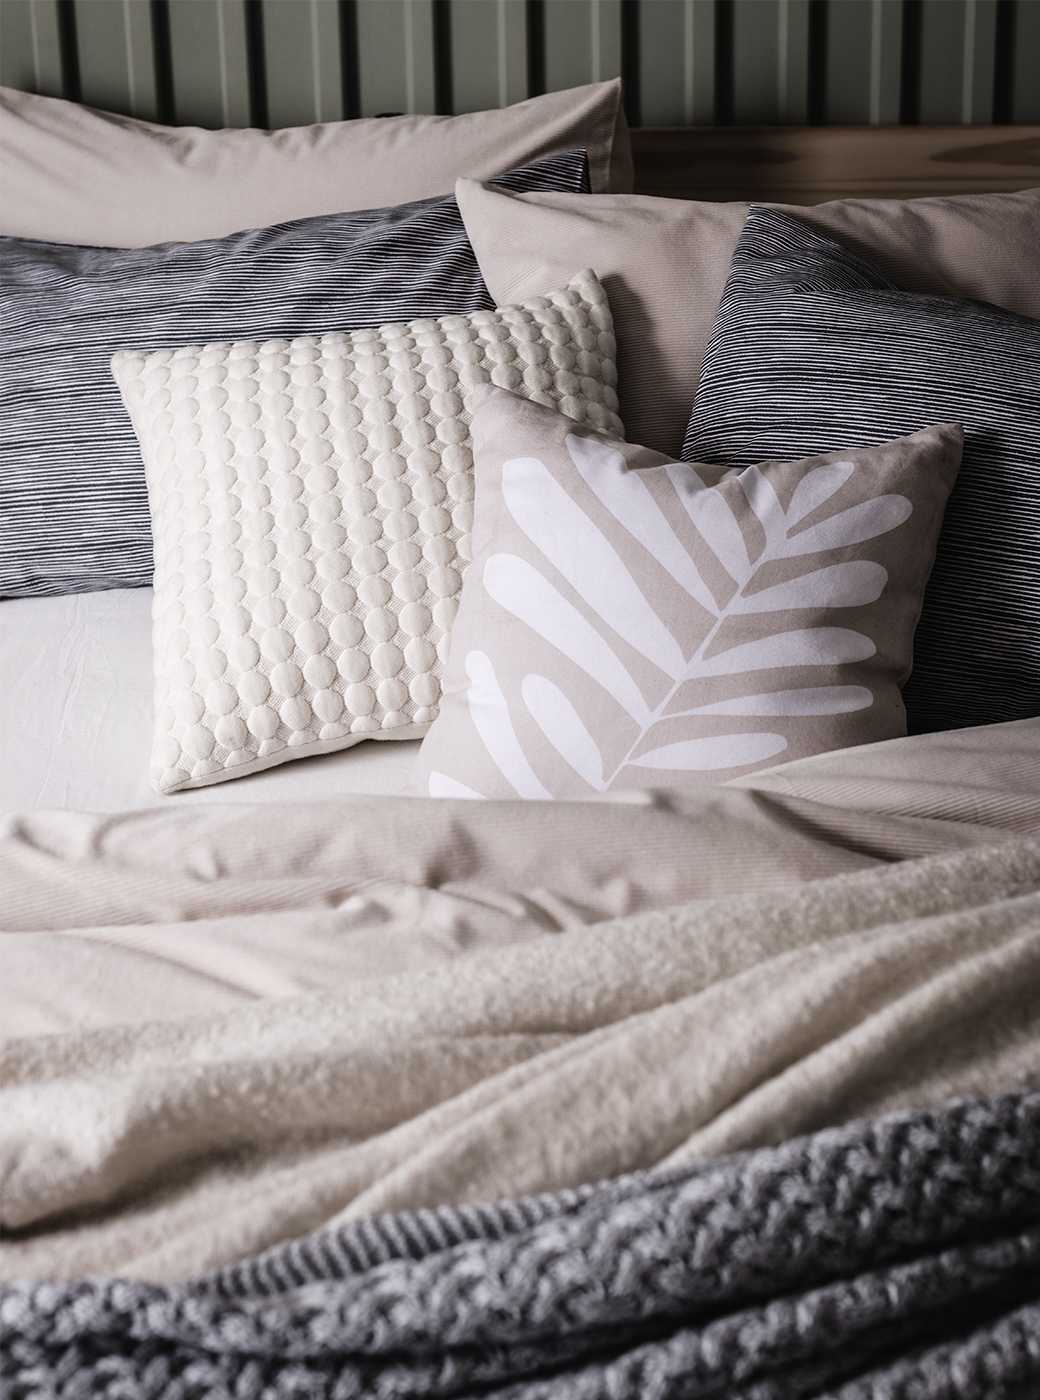 Textured cushions in neutral colours on bed.